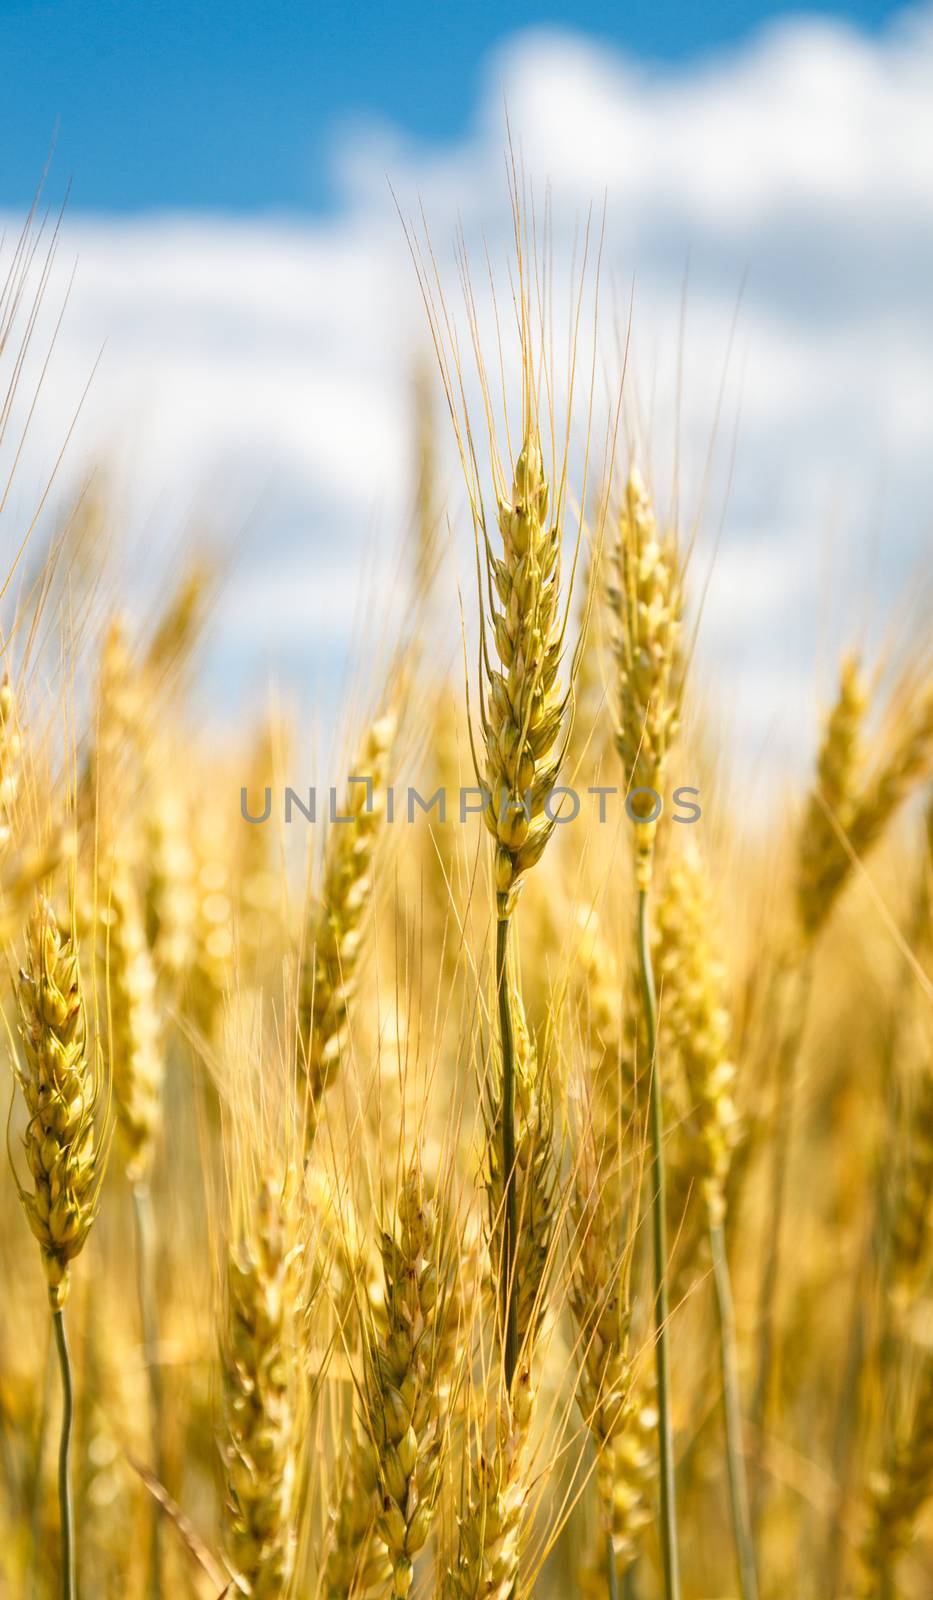 Closeup view of wheat ear by AGorohov